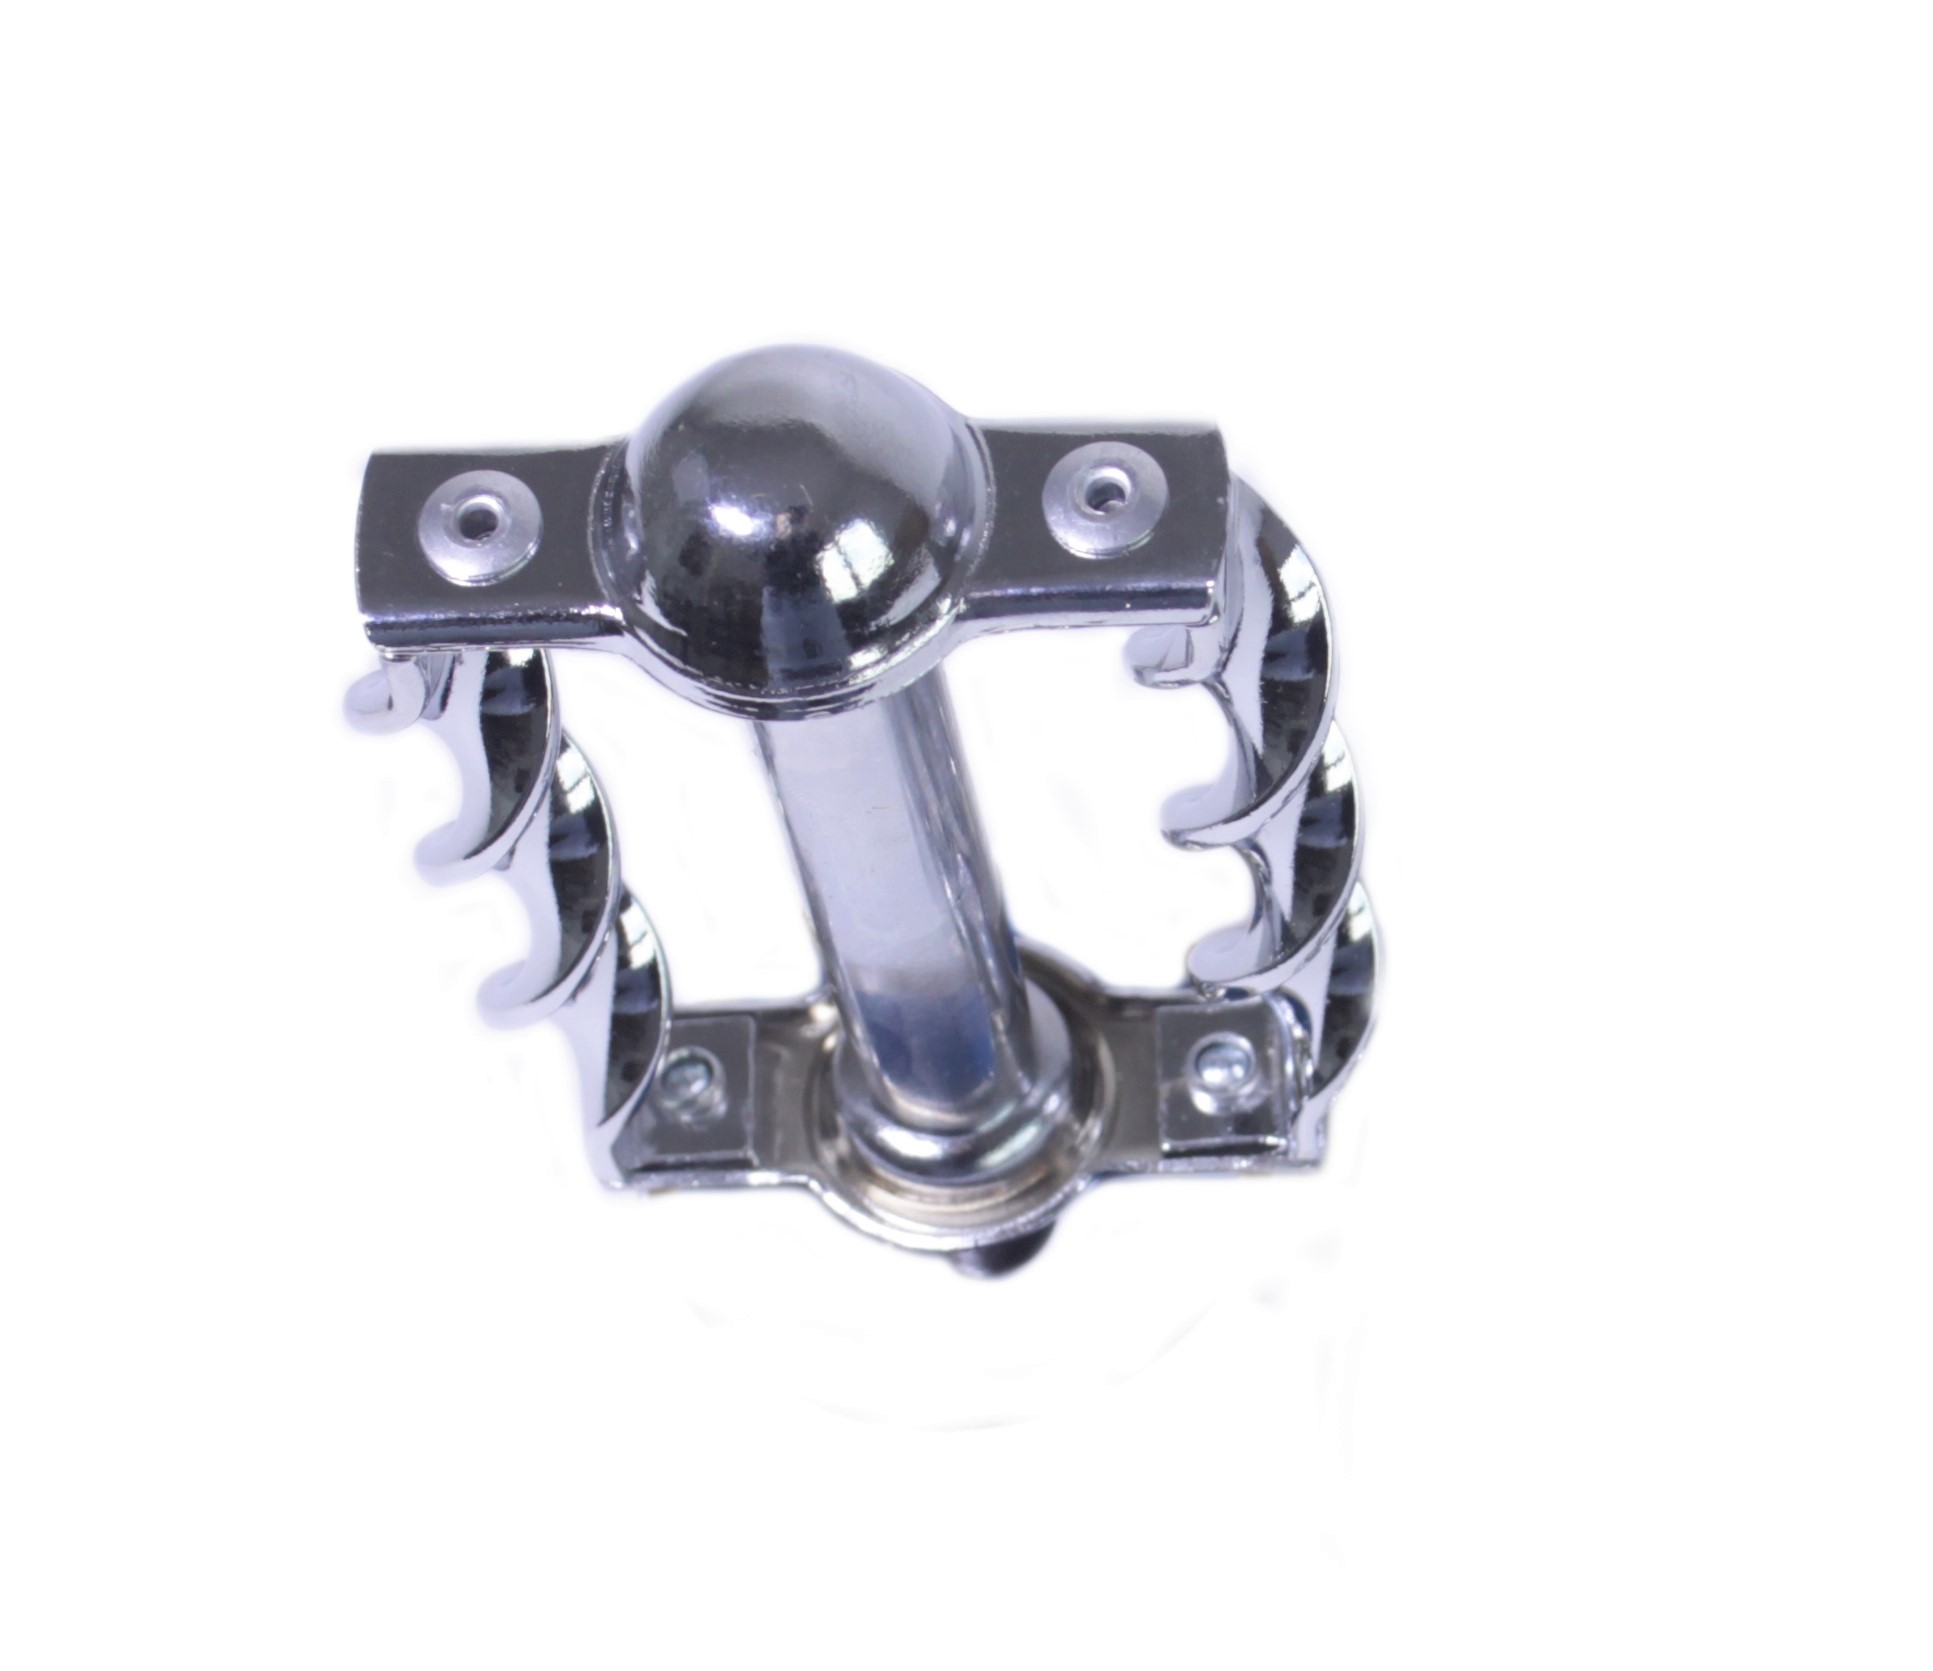 Lowrider Pedals, twisted, chrome 1/2 inch thread, CP, one pair